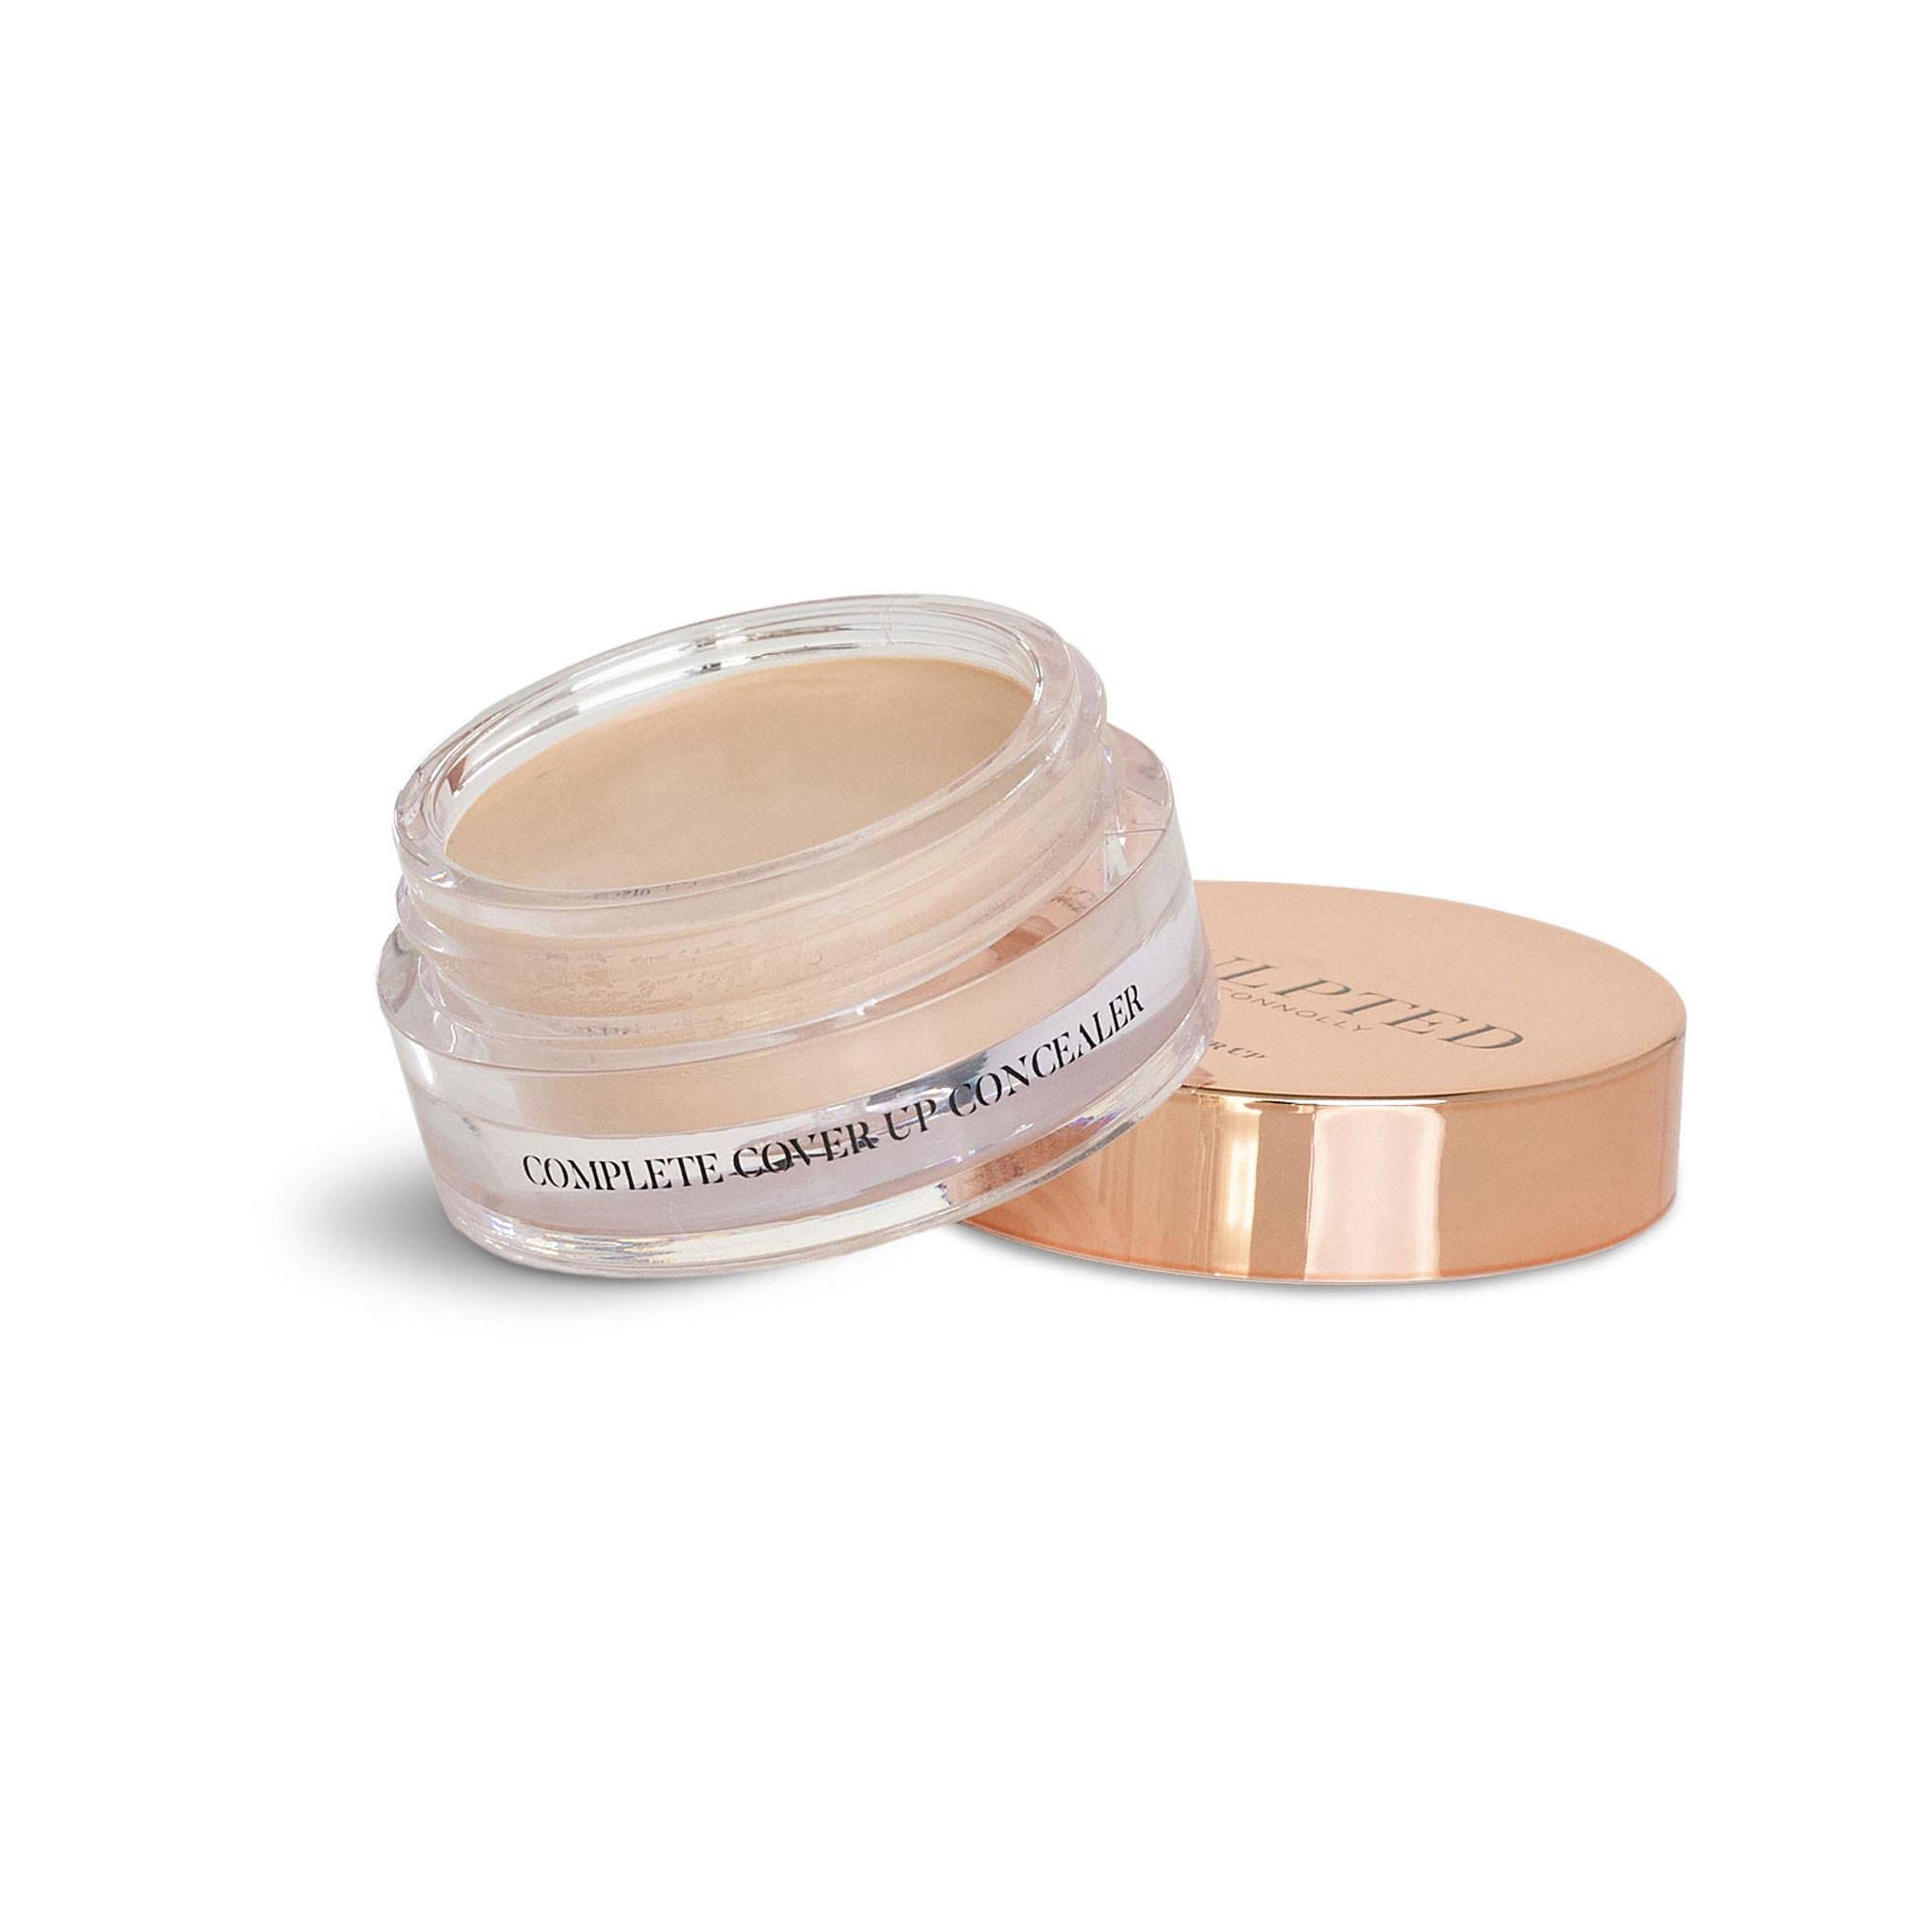 Sculpted by AIMEE Complete Cover Up Concealer Fair 2.0